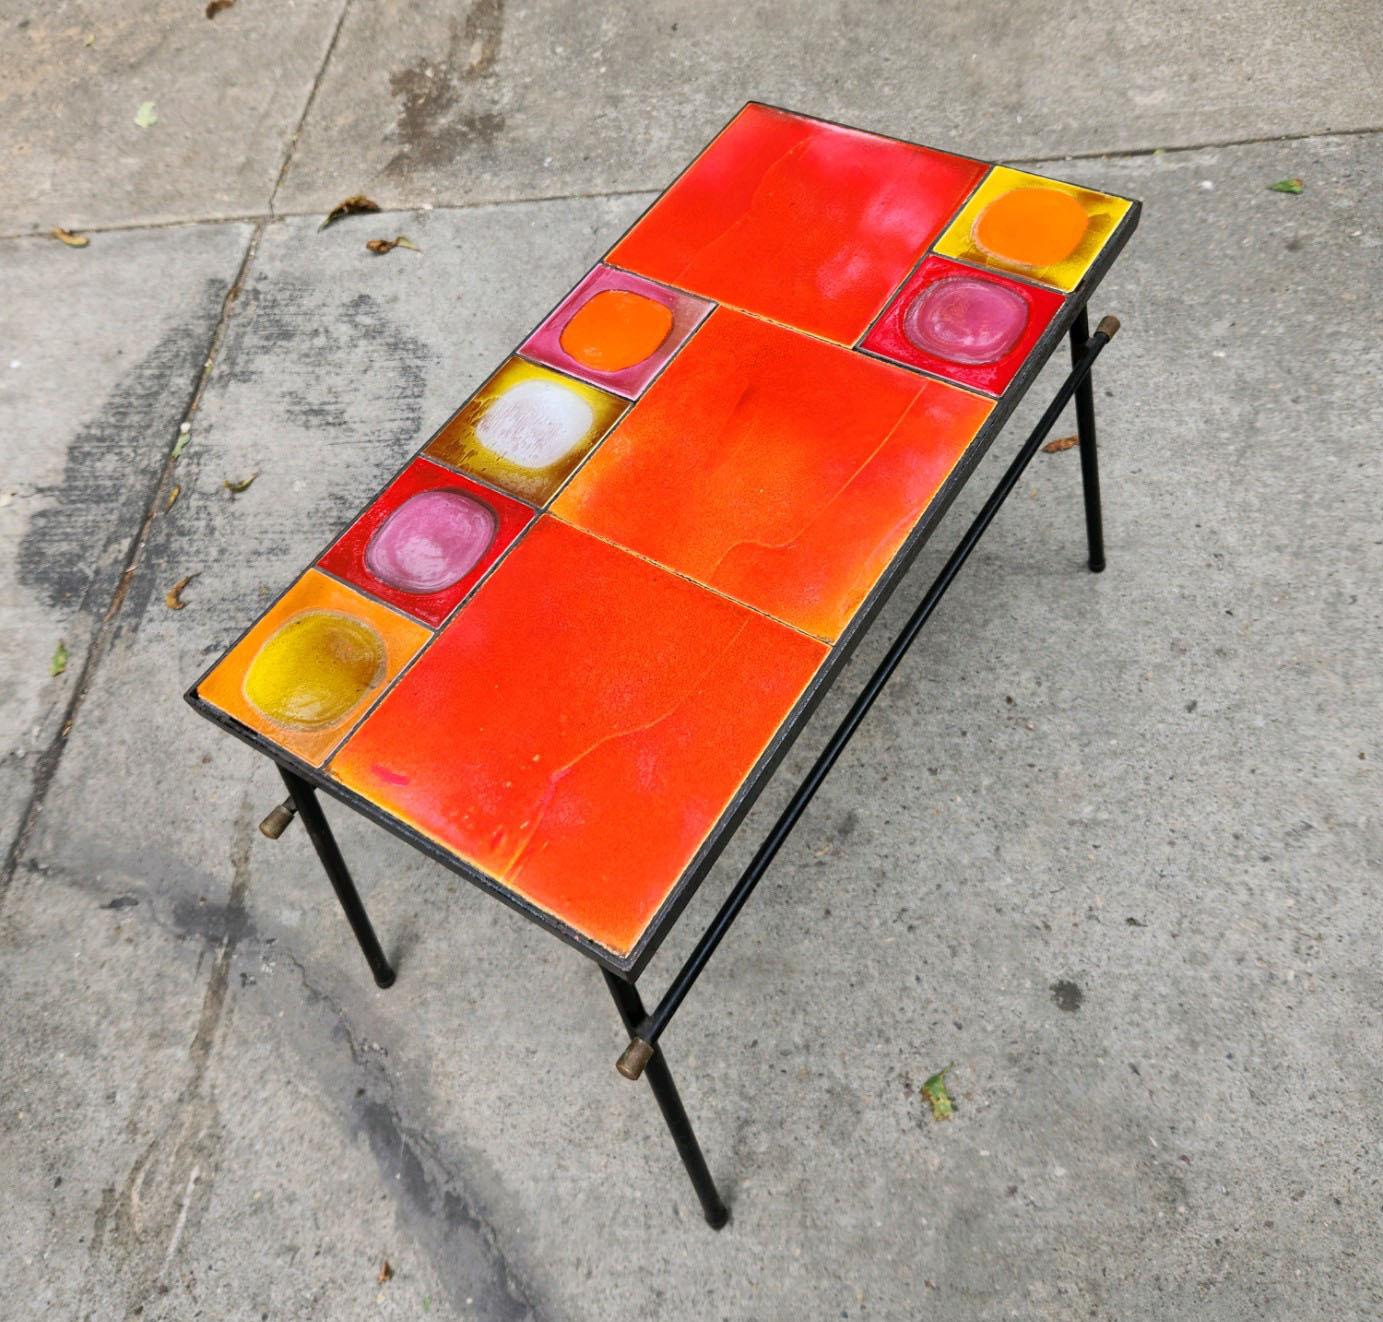 Gueridon Coffee Table with Colorful Ceramic Tiles by Roger Capron In Good Condition For Sale In Stratford, CT